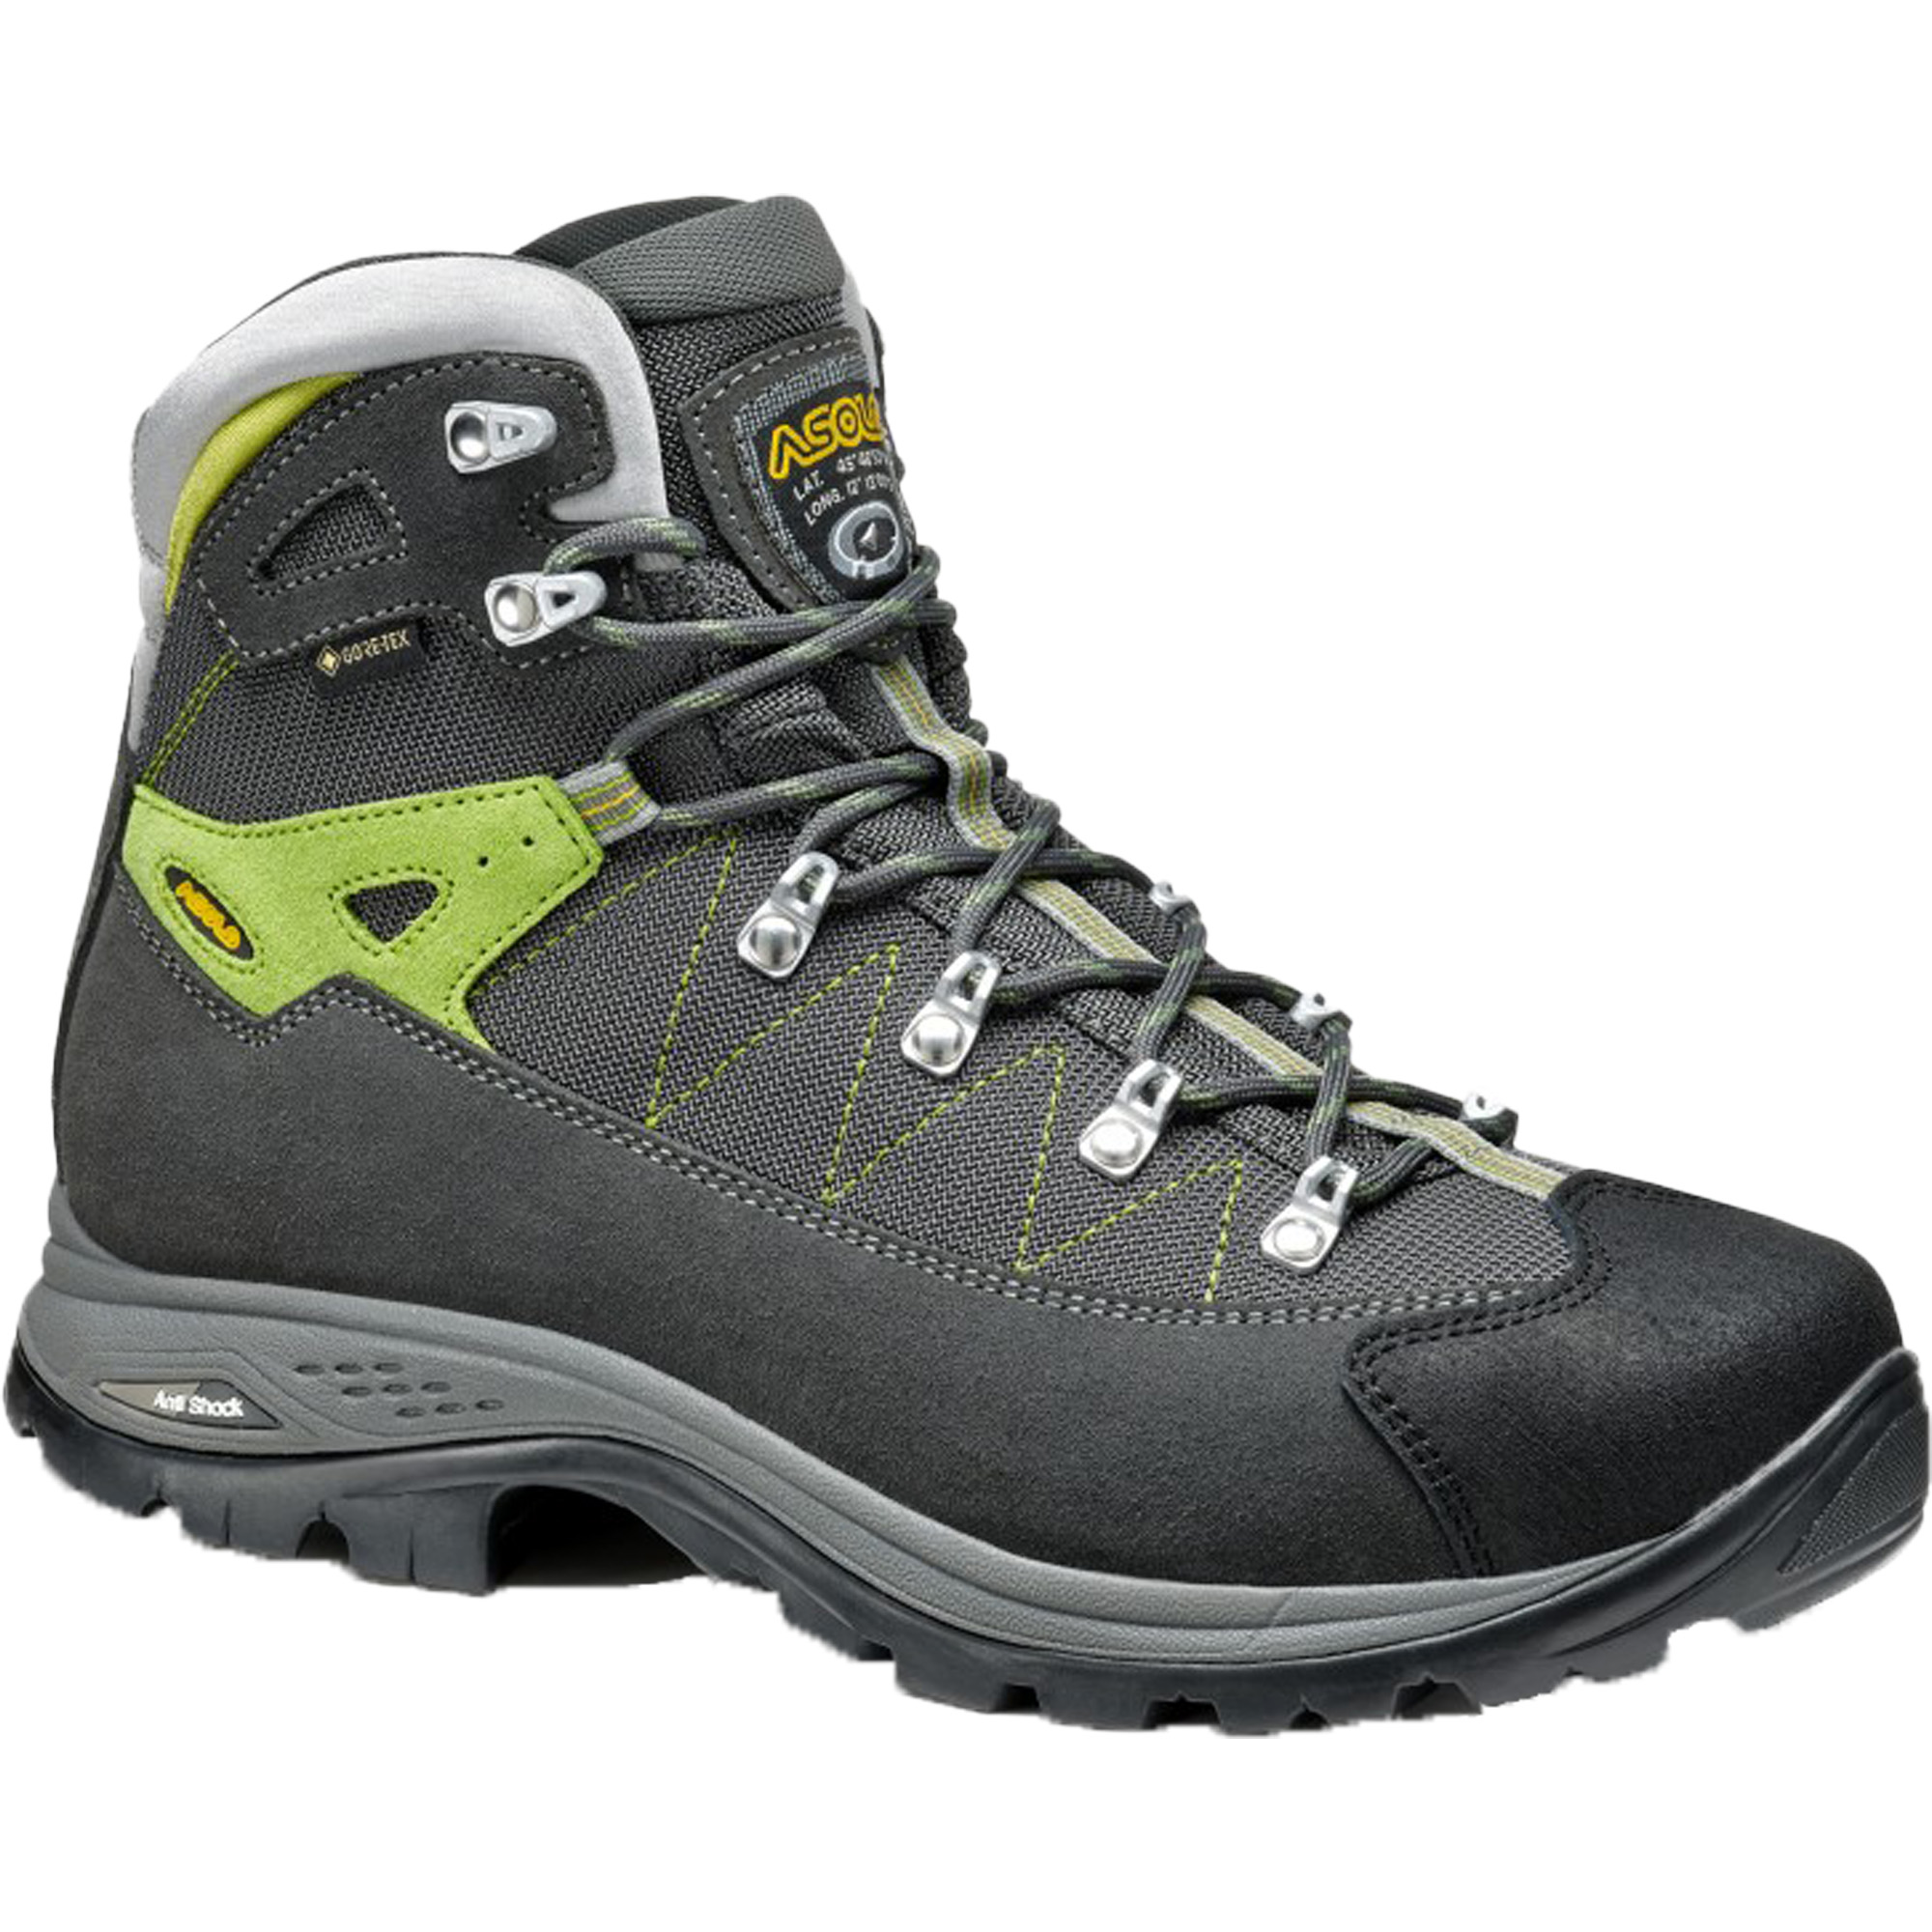 Asolo Finder GV Gore-Tex Hiking Boots, UK 7 Graphite/Green Lime